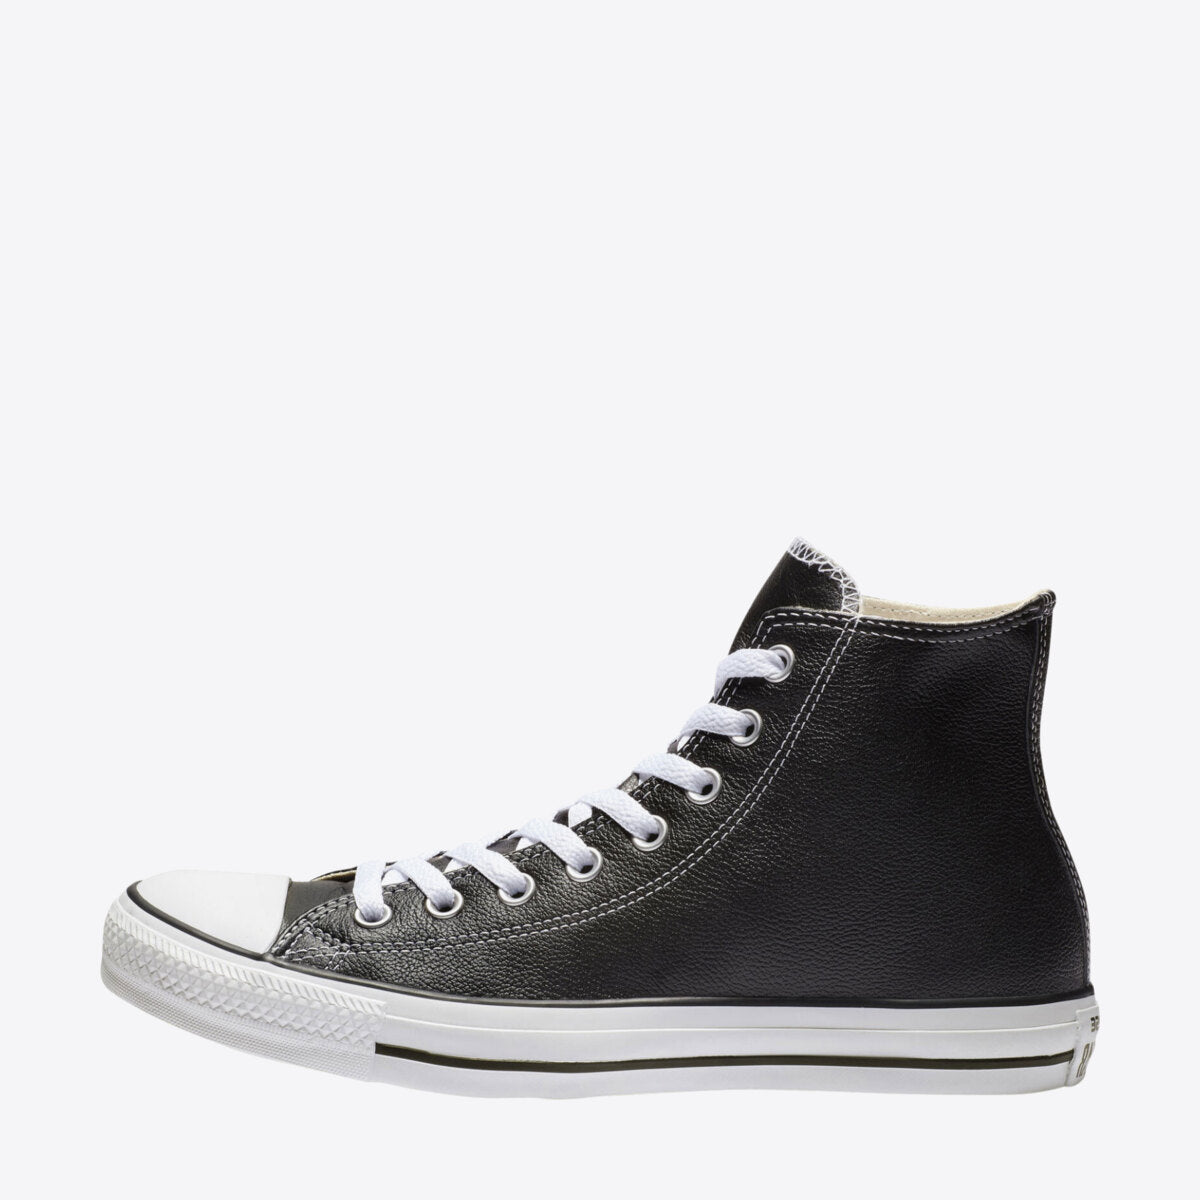  Chuck Taylor All Star Leather High Top Black